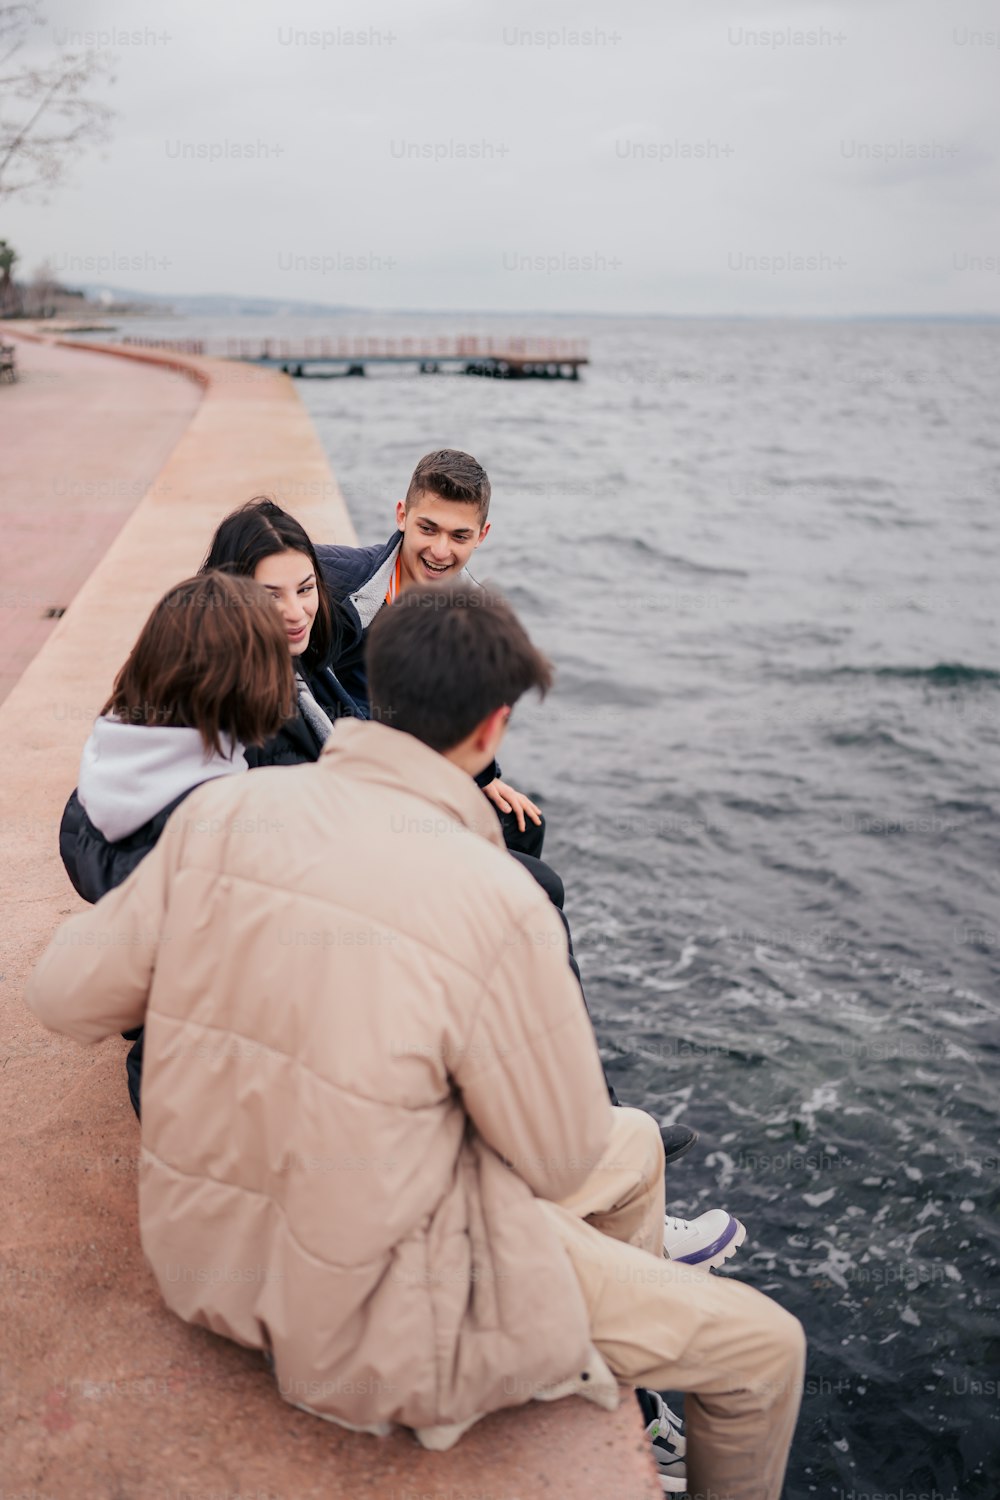 a group of people sitting on the edge of a body of water